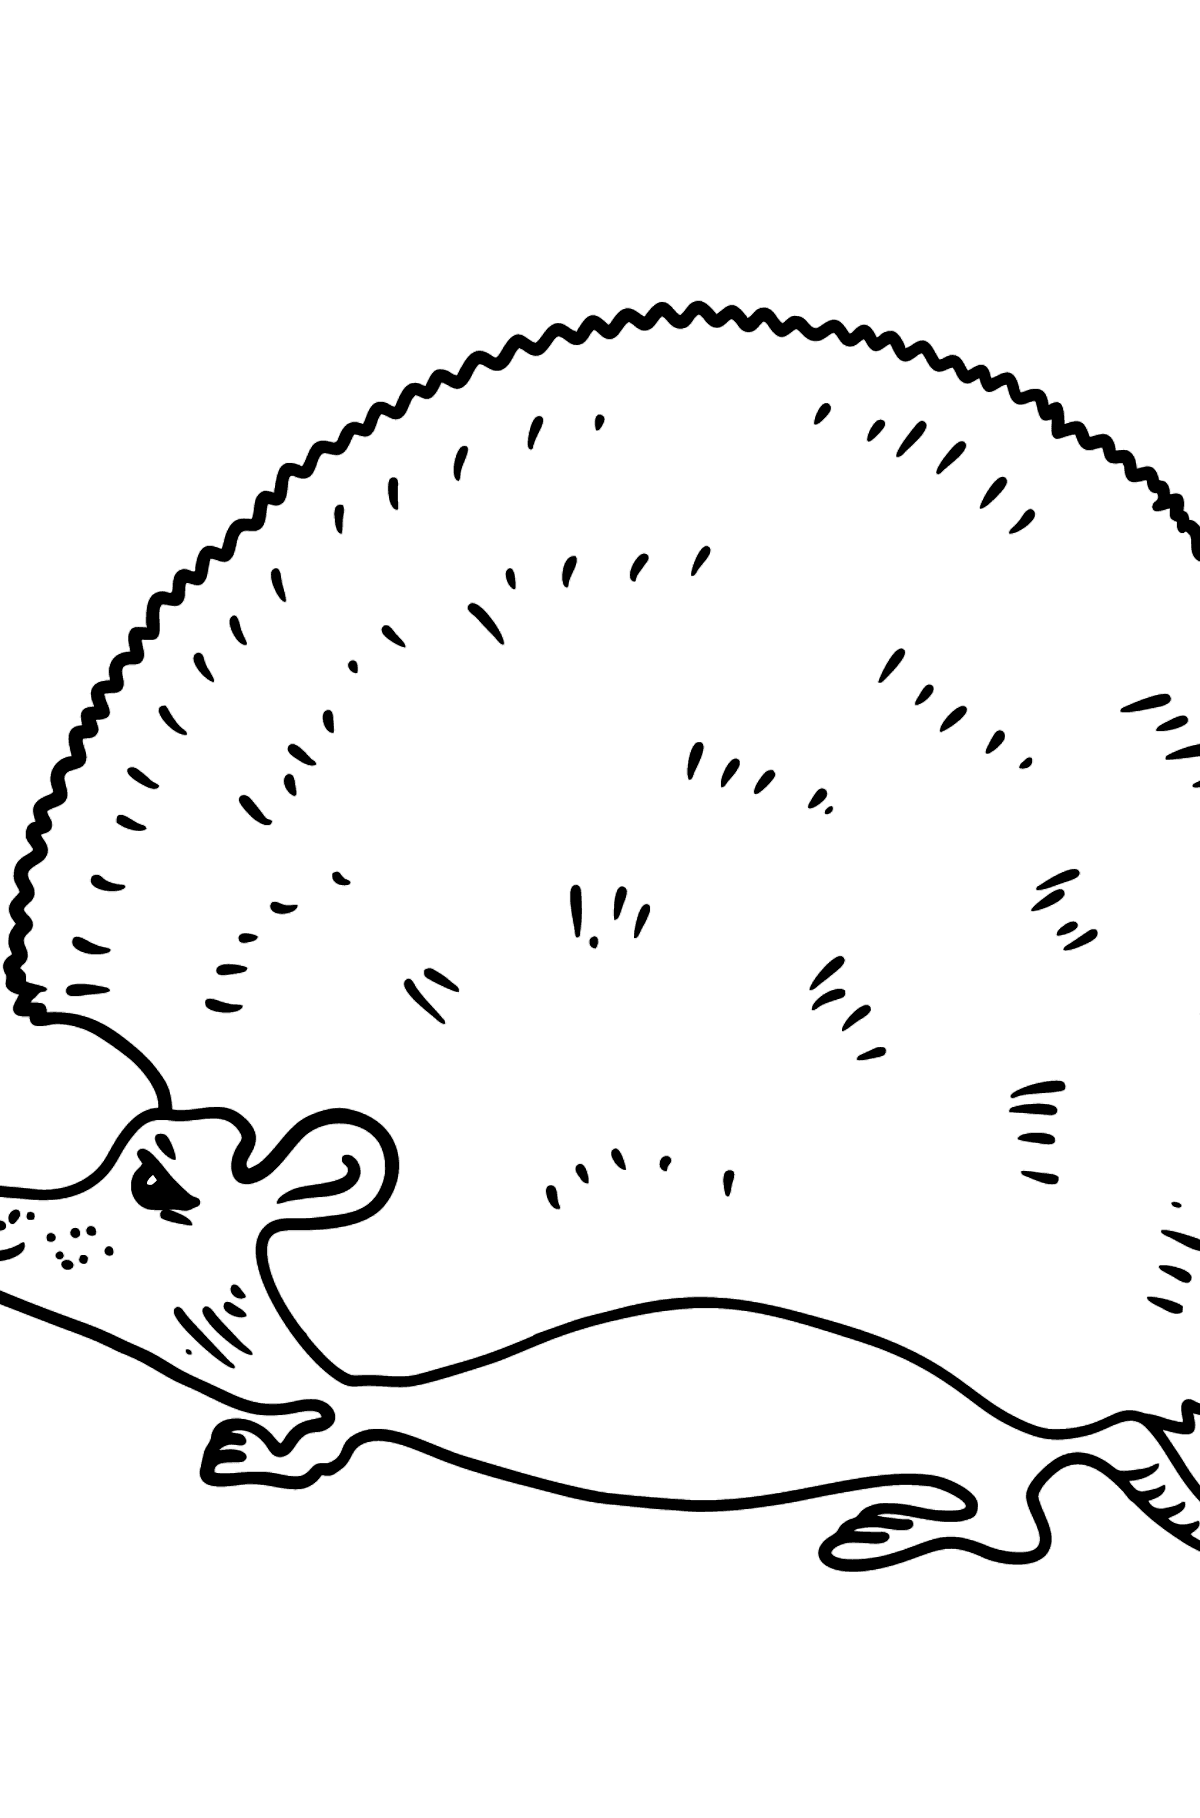 Hedgehog coloring page - Coloring Pages for Kids